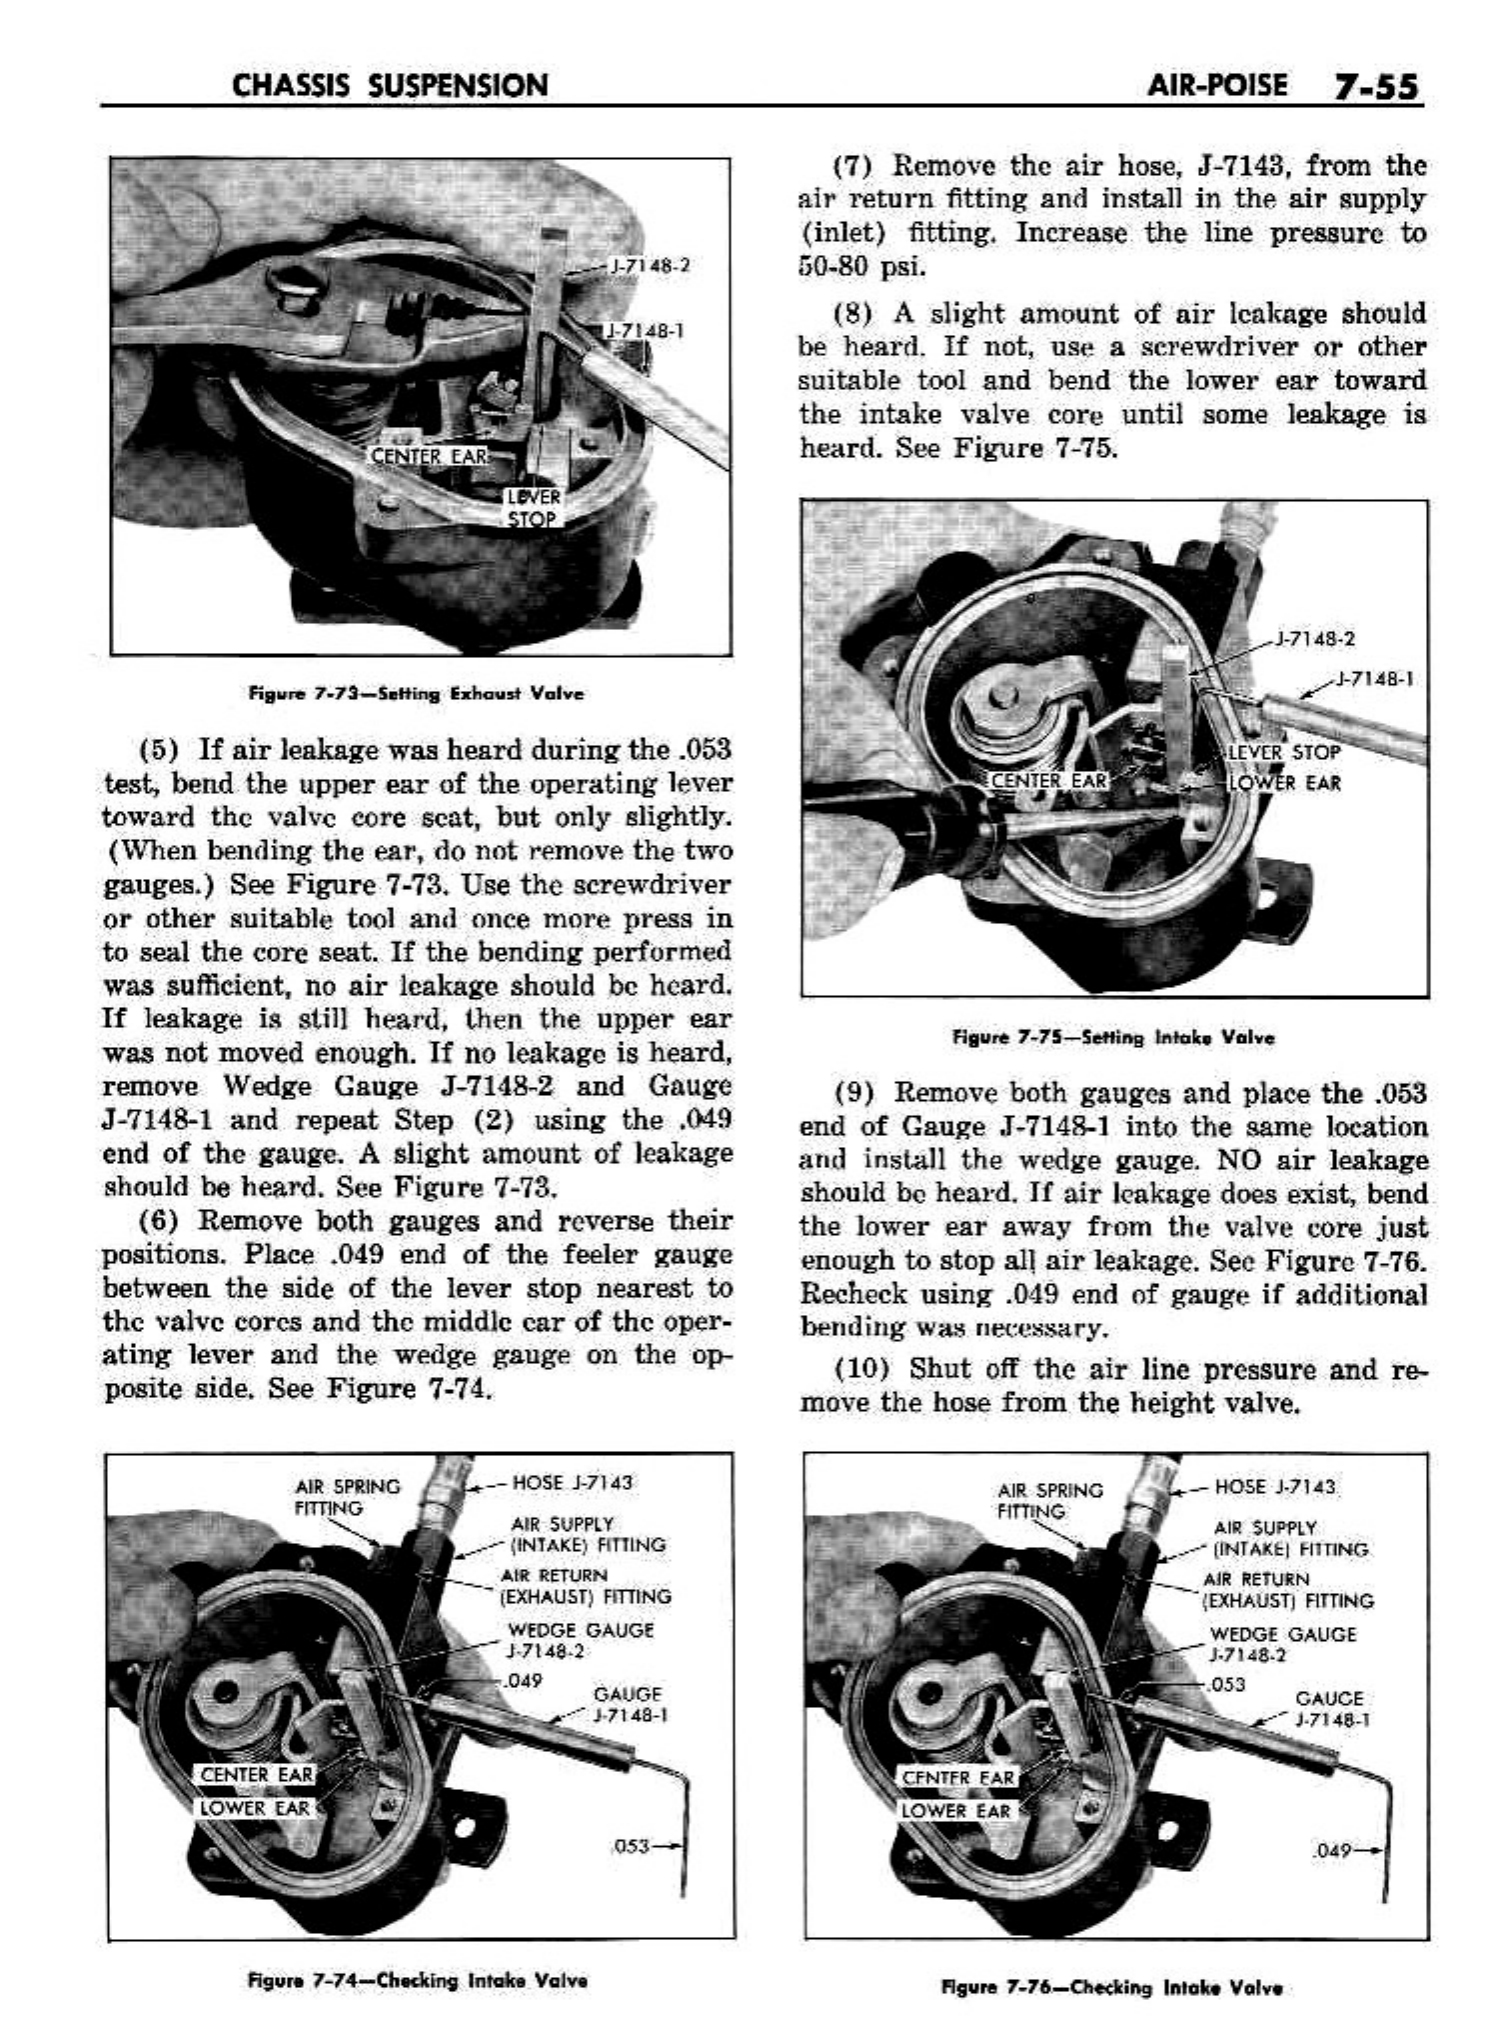 n_08 1958 Buick Shop Manual - Chassis Suspension_55.jpg